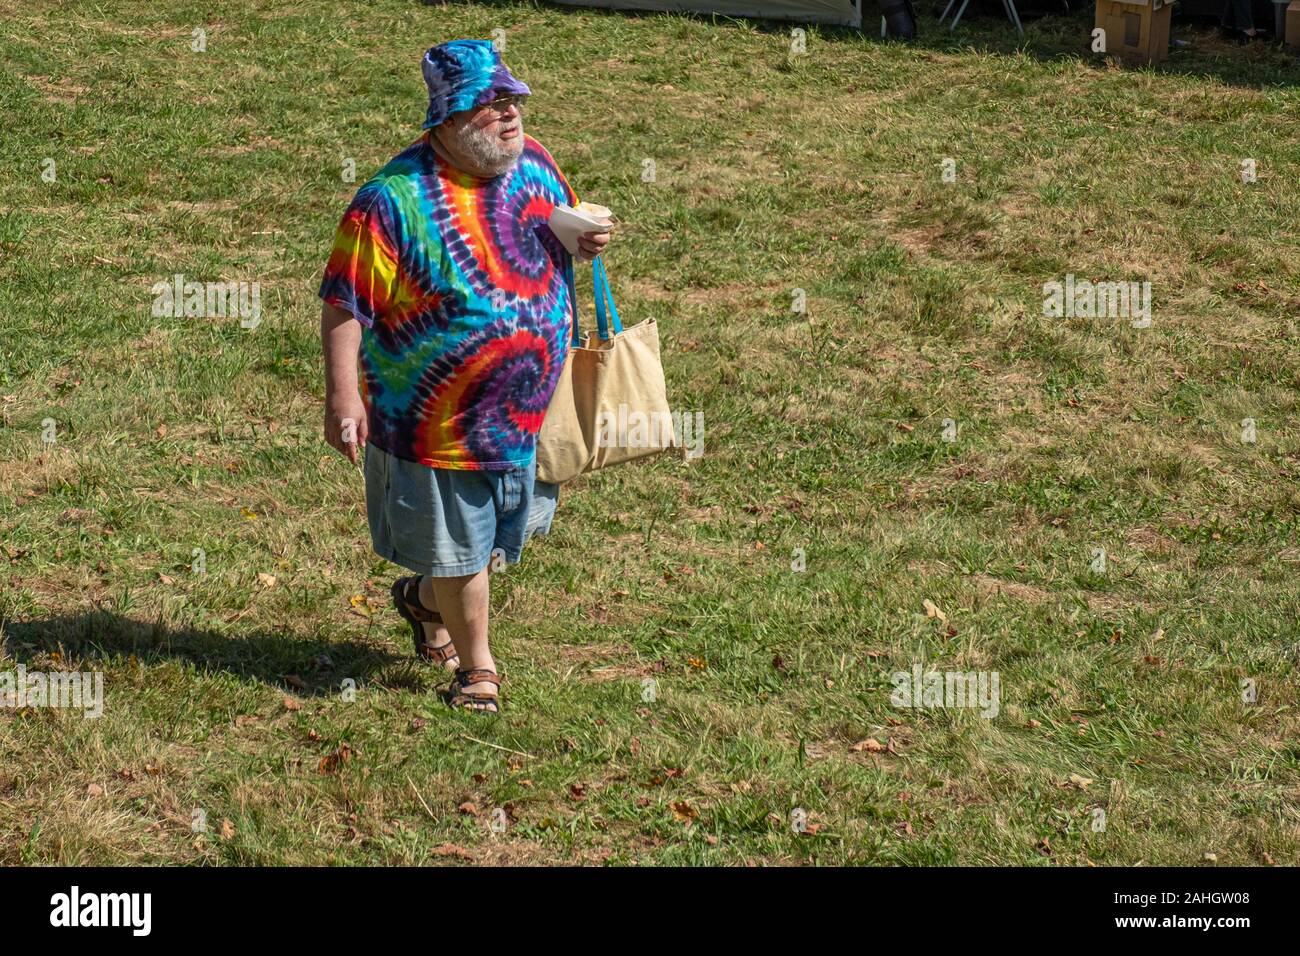 A man in colorful clothing at the garlic and Arts Festival in Orange, MA Stock Photo